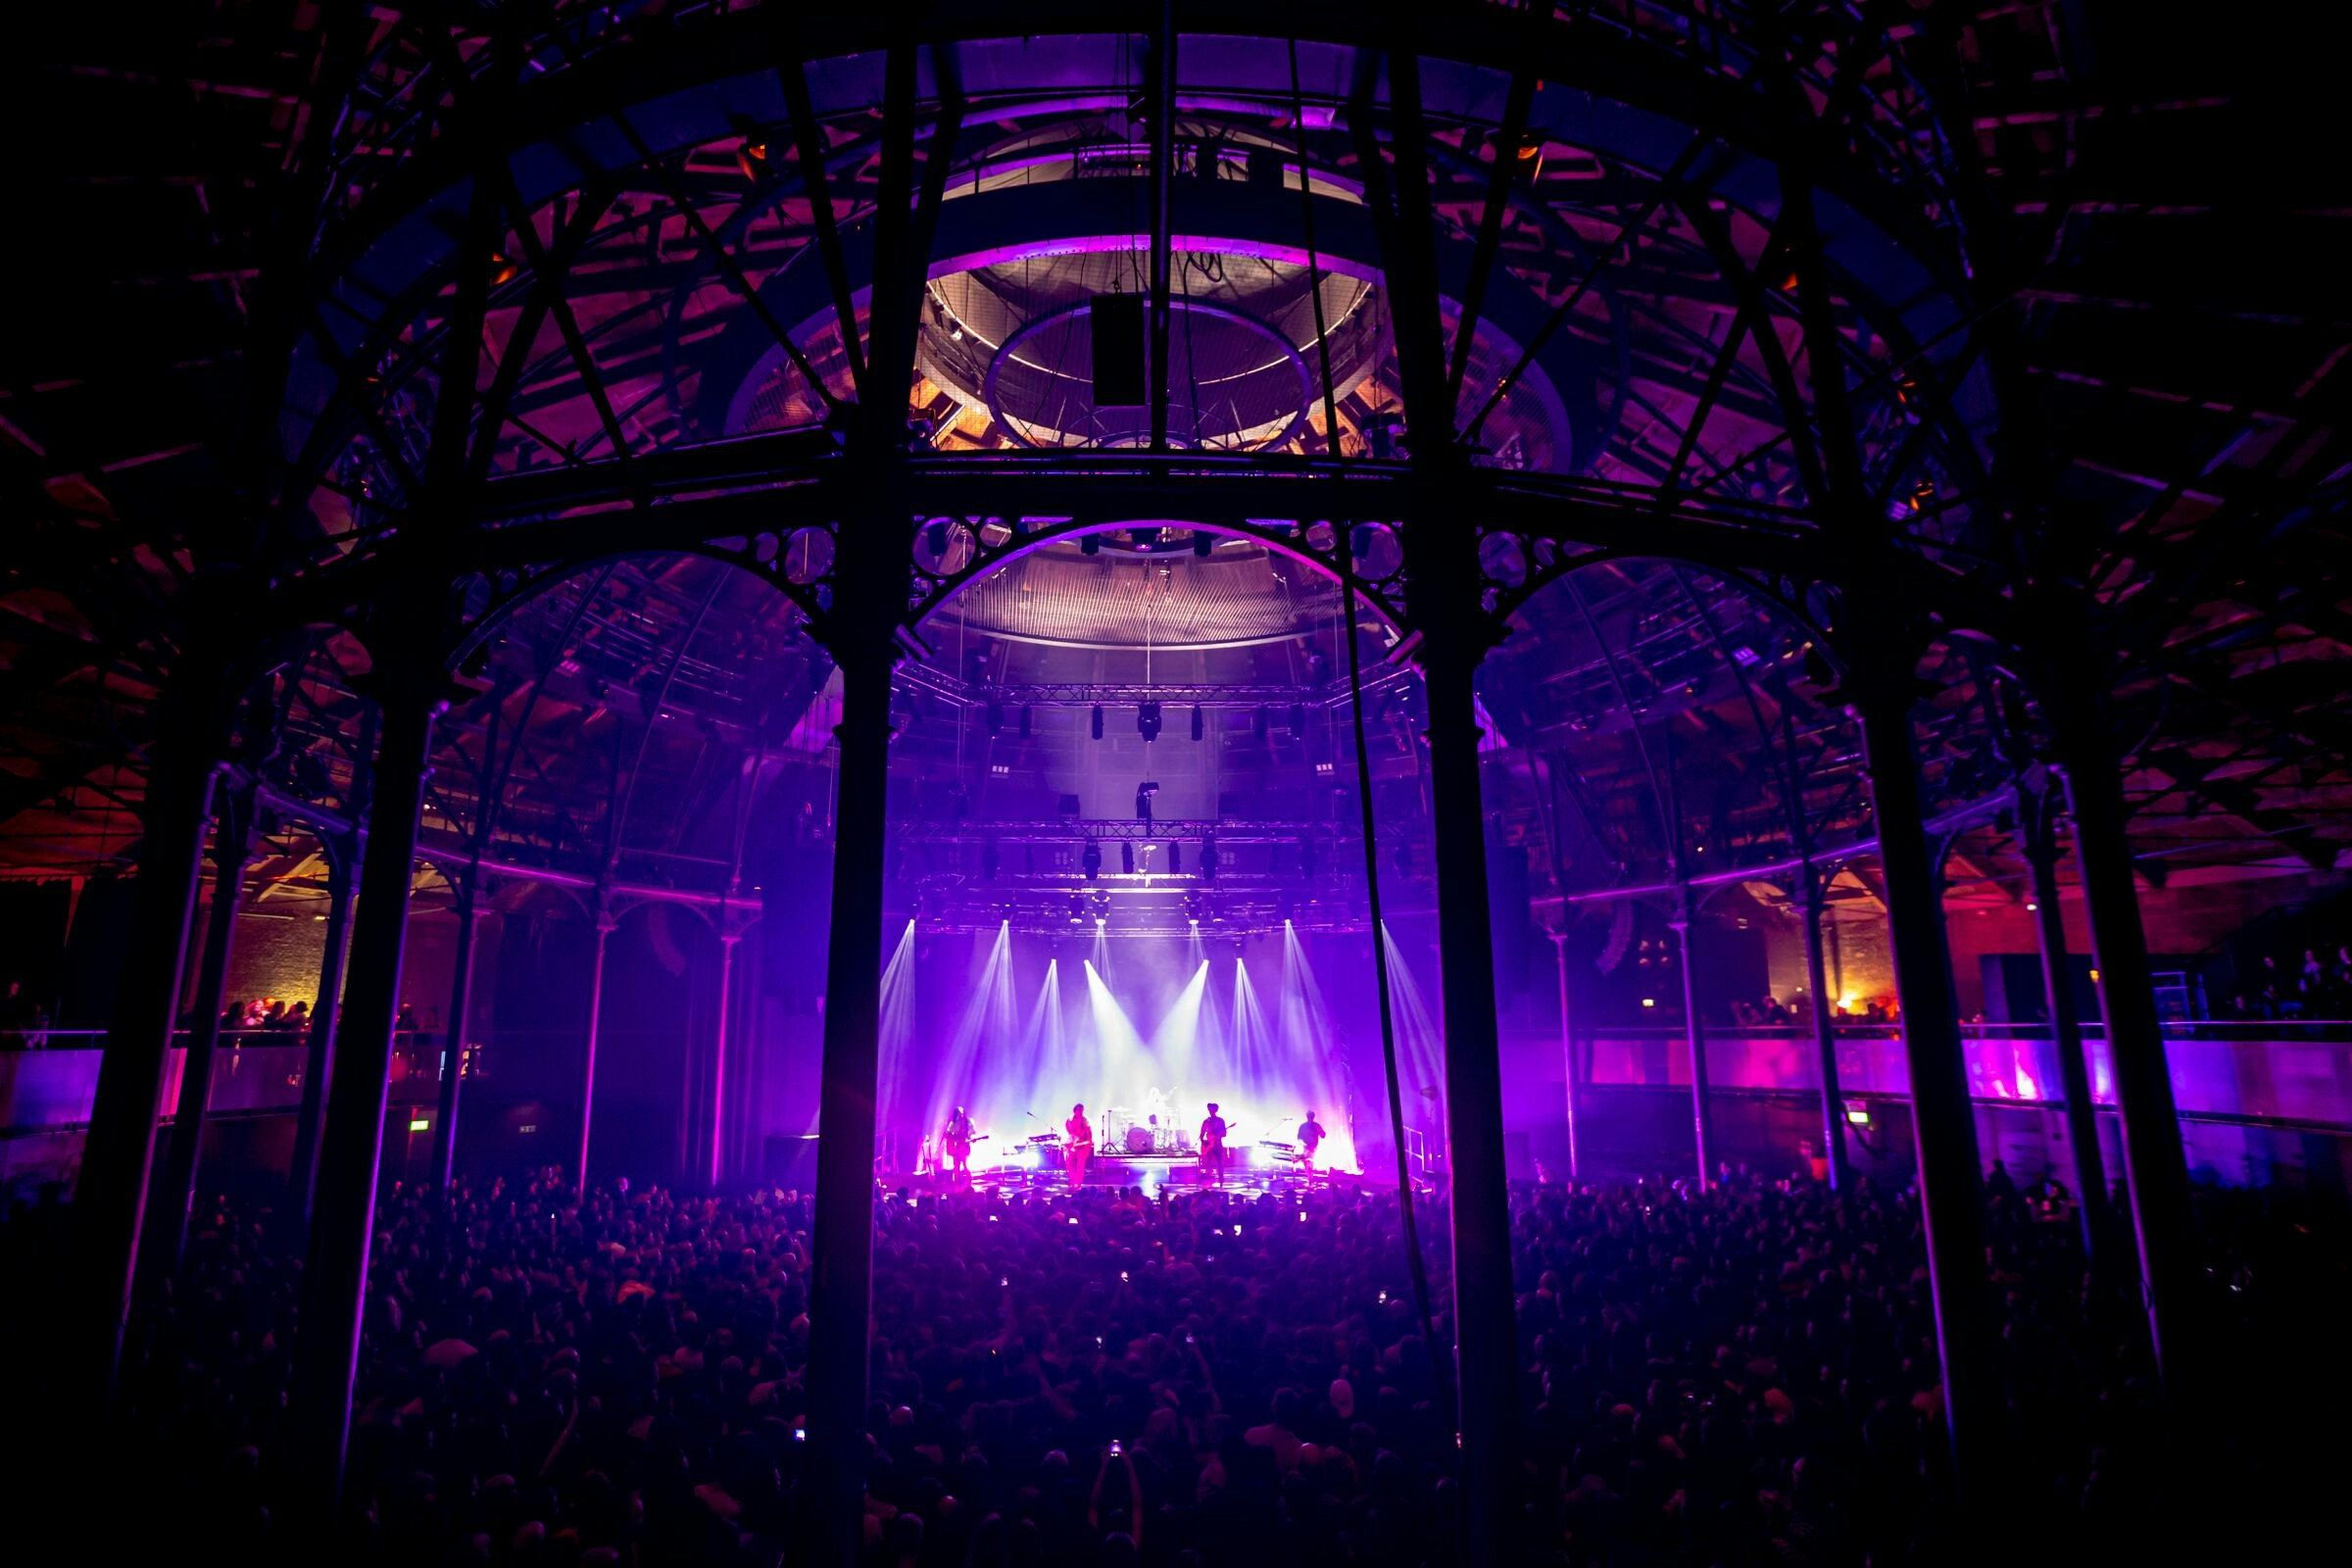 The audience watch a band playing on a lit-up stage at the Roundhouse in London.